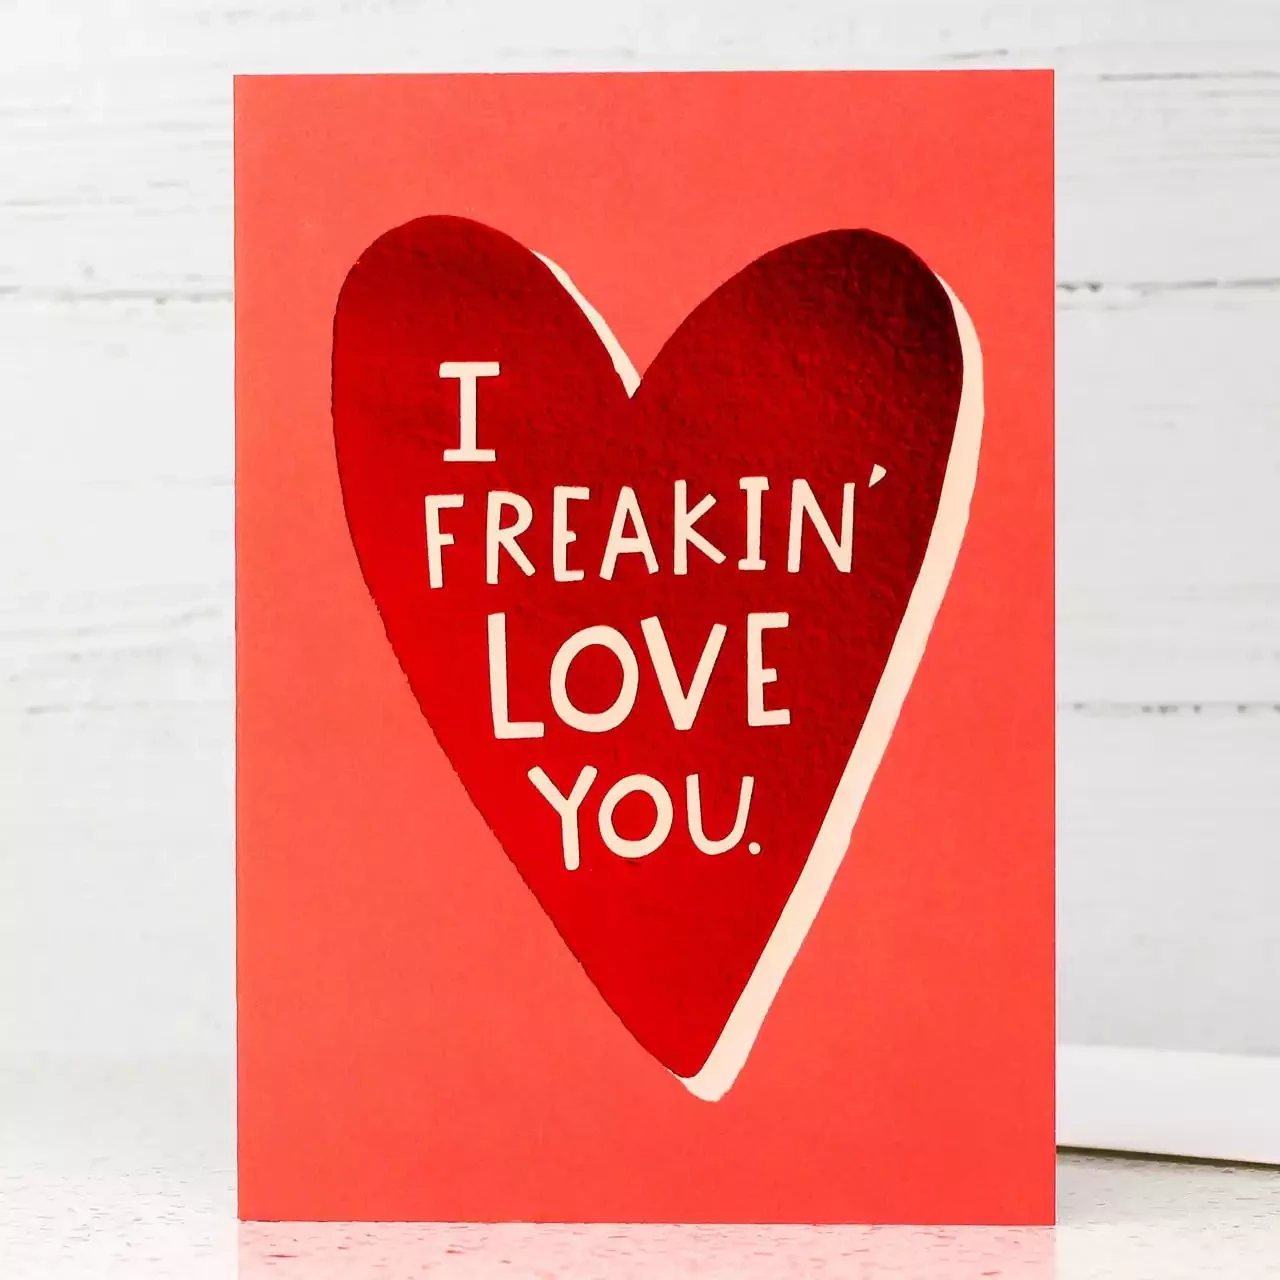 I Freakin' Love You Card by Stormy Knight